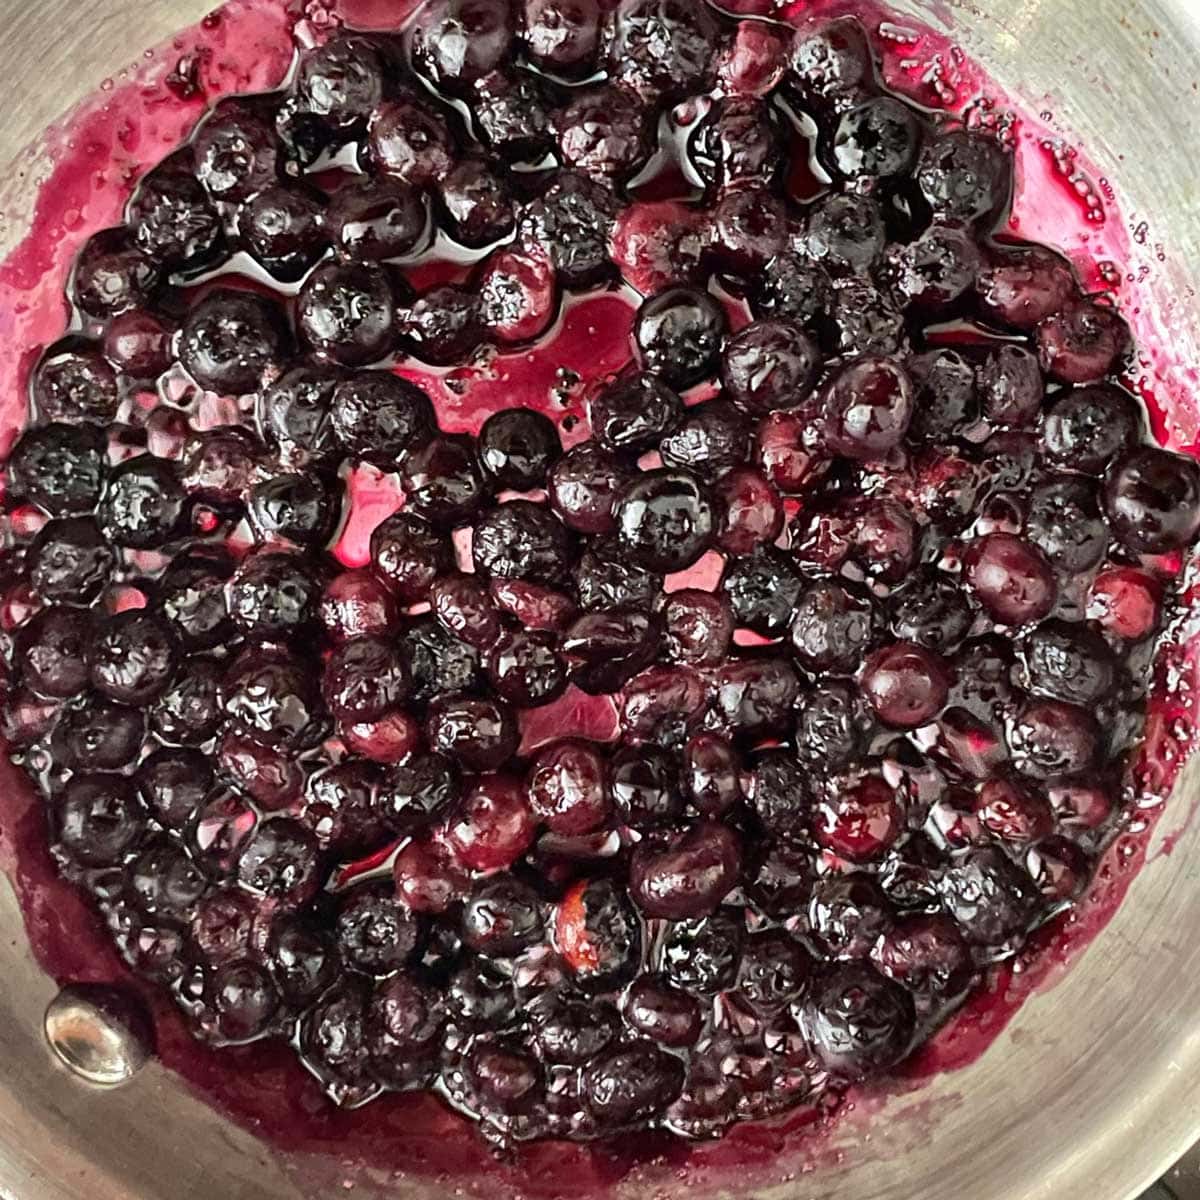 Blueberry cooking in a skillet.